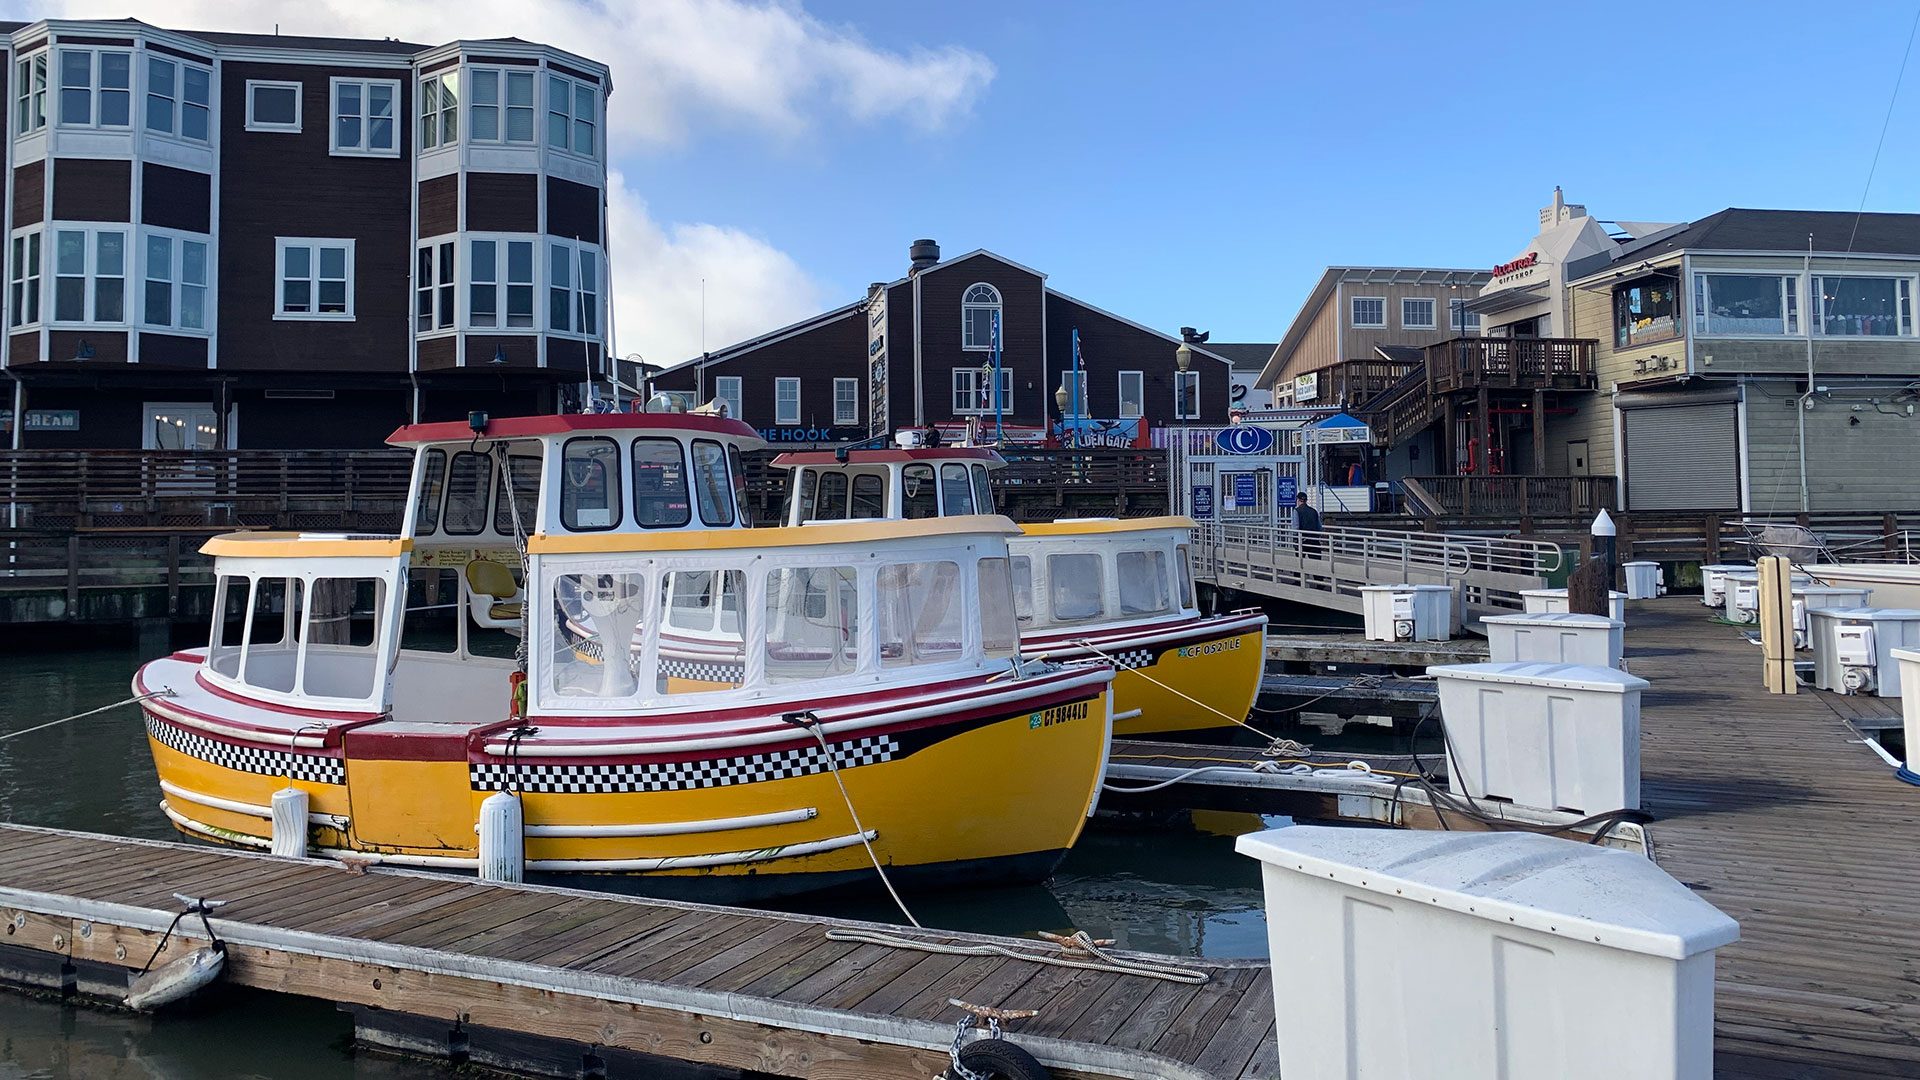 Several yellow boats are tied up at a pier with buildings in the background.